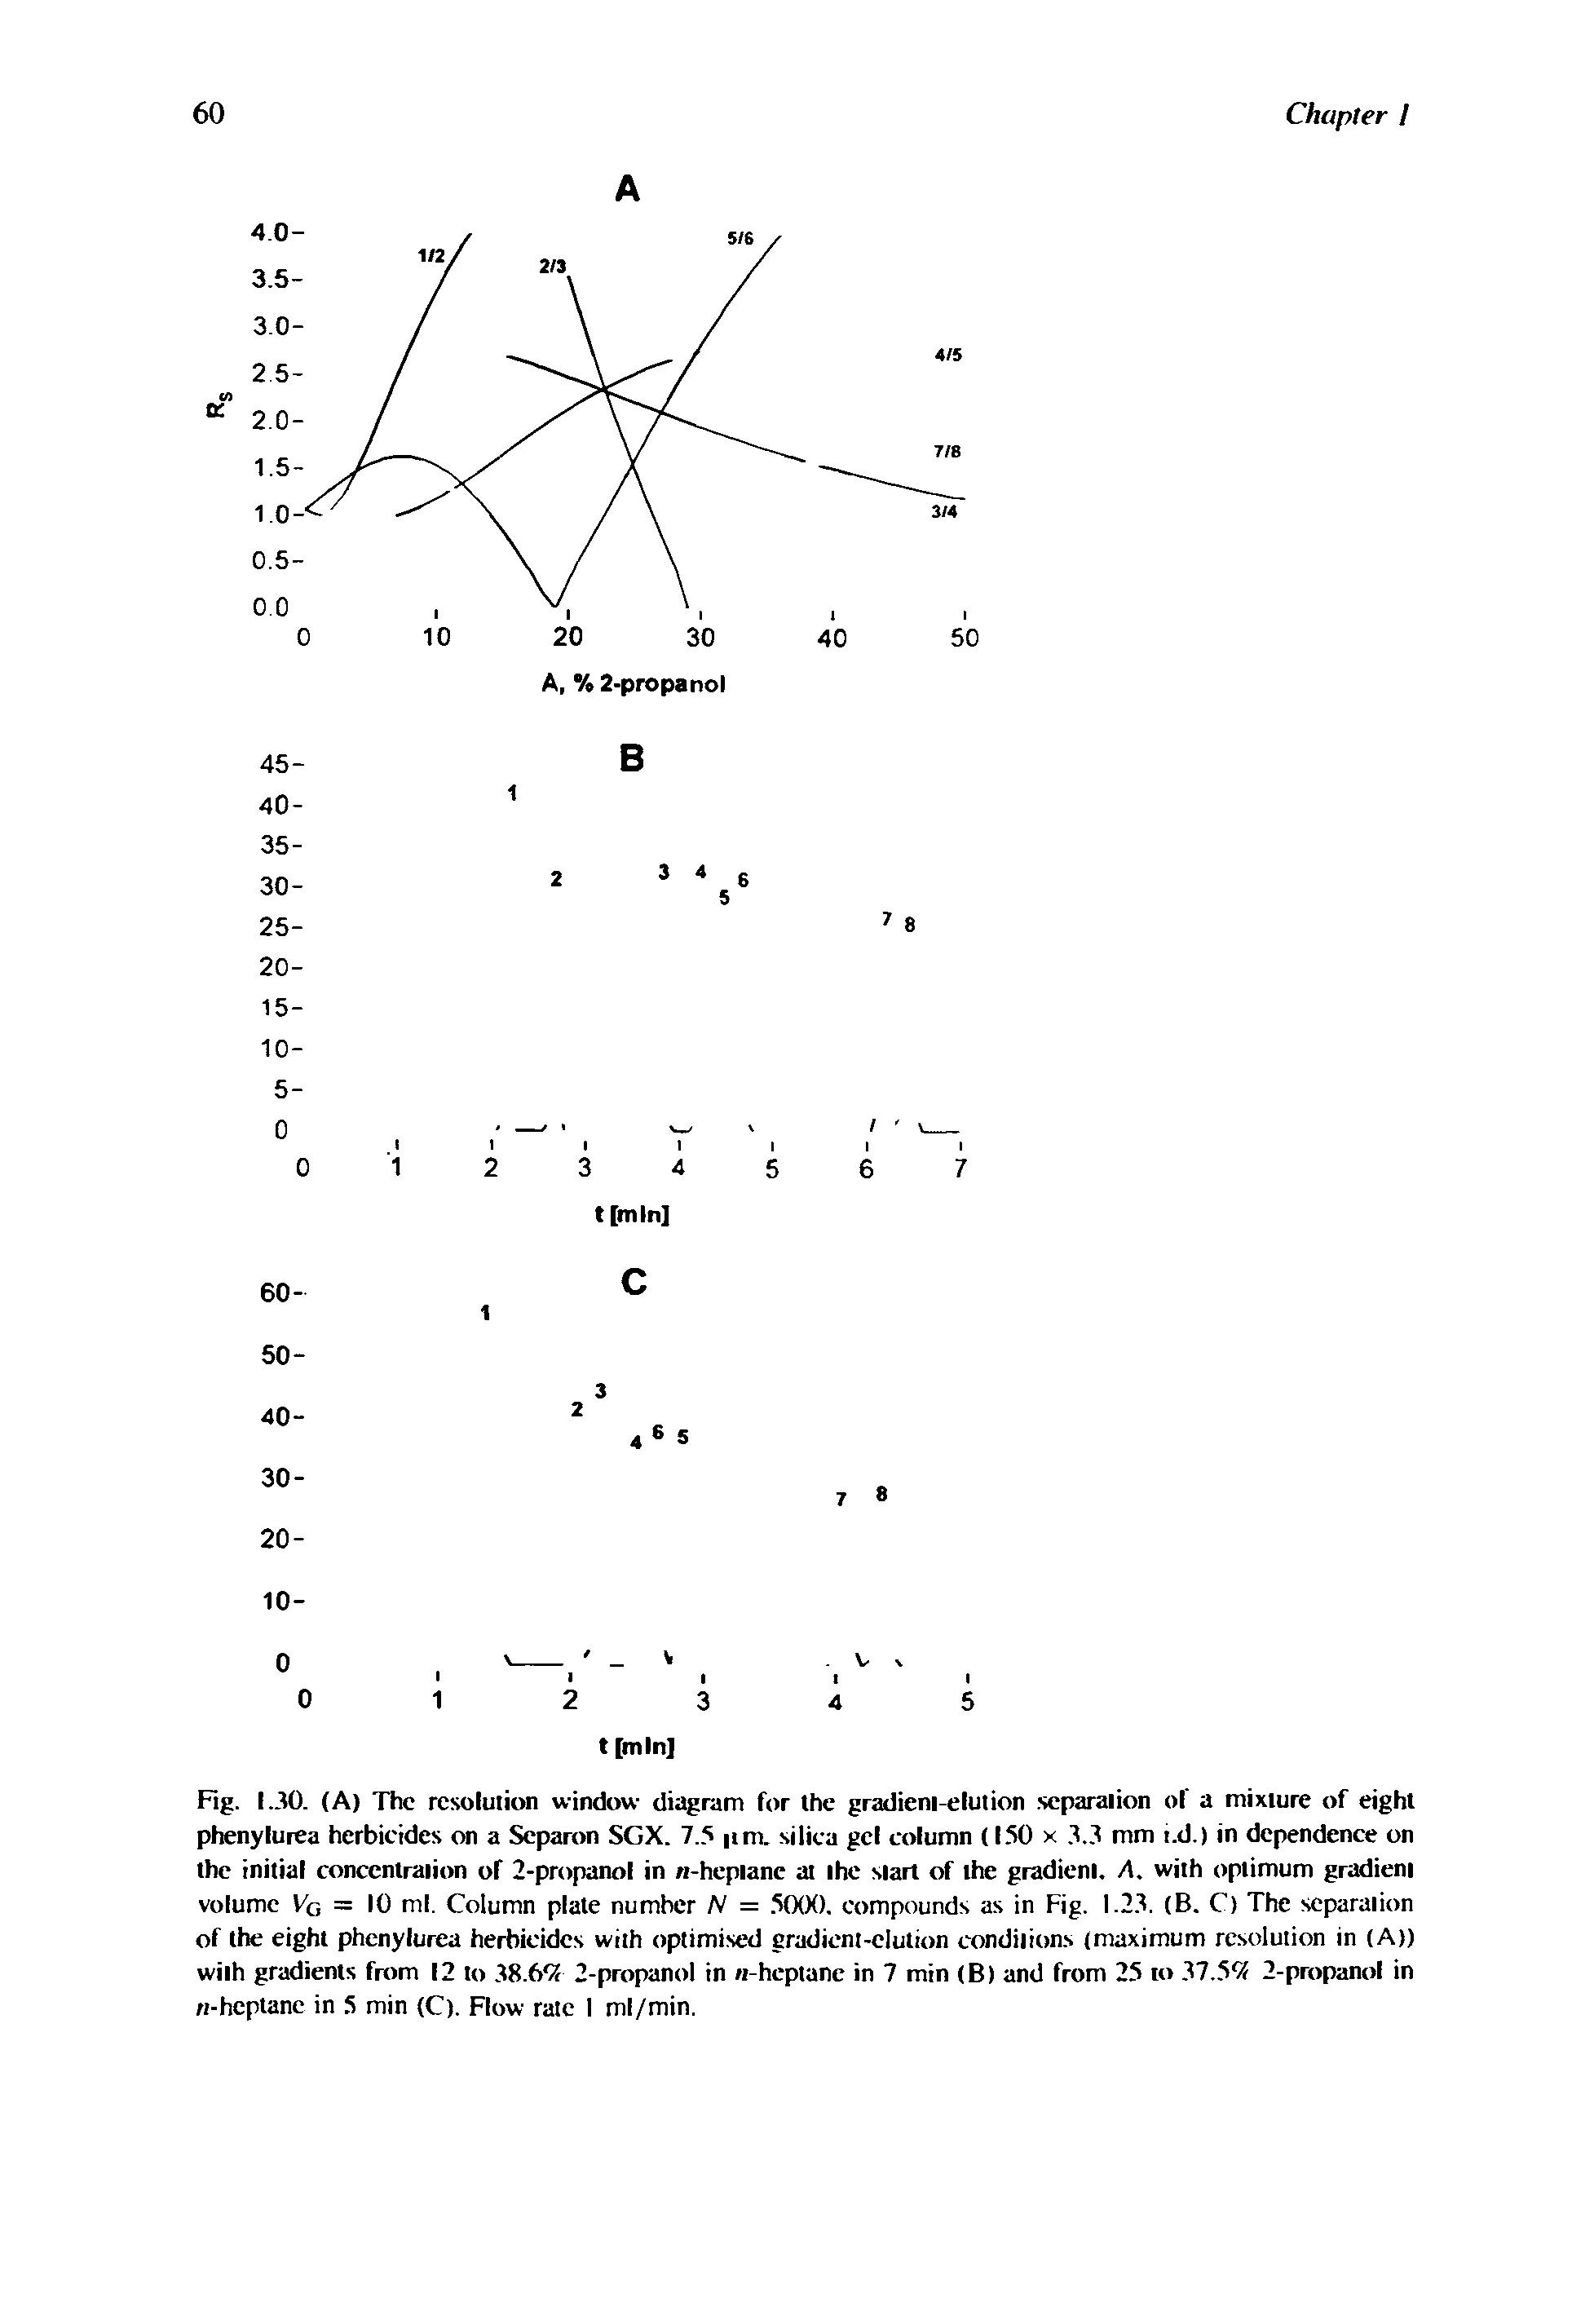 Fig. 1.30. (A) The resolution window diagram for the gradieni-elulion separalion of a mixture of eight phenyluiea herbicides on a Separon SGX. 1.5 tm. silica gel column (150 x 3.3 mm i.d.) in dependence on the initial concentration of 2-propanol in n-hcpiane at ihe slart of the gradicni. A. with optimum gradient volume Vc, - 10 ml. Column plate number N = 5000. compounds as in Fig. 1.23. (B. C) The separation of the eight phenylurea herbicides with optimised gradient-elution conditions (maximum resolution in (A)) with gradients from 12 to 38.6 2 2-propanol in n-hcptanc in 7 min (B) and from 25 to 37.5 2 2-propanol in fi-heptane in 5 min (C). Flow rale I ml/min.